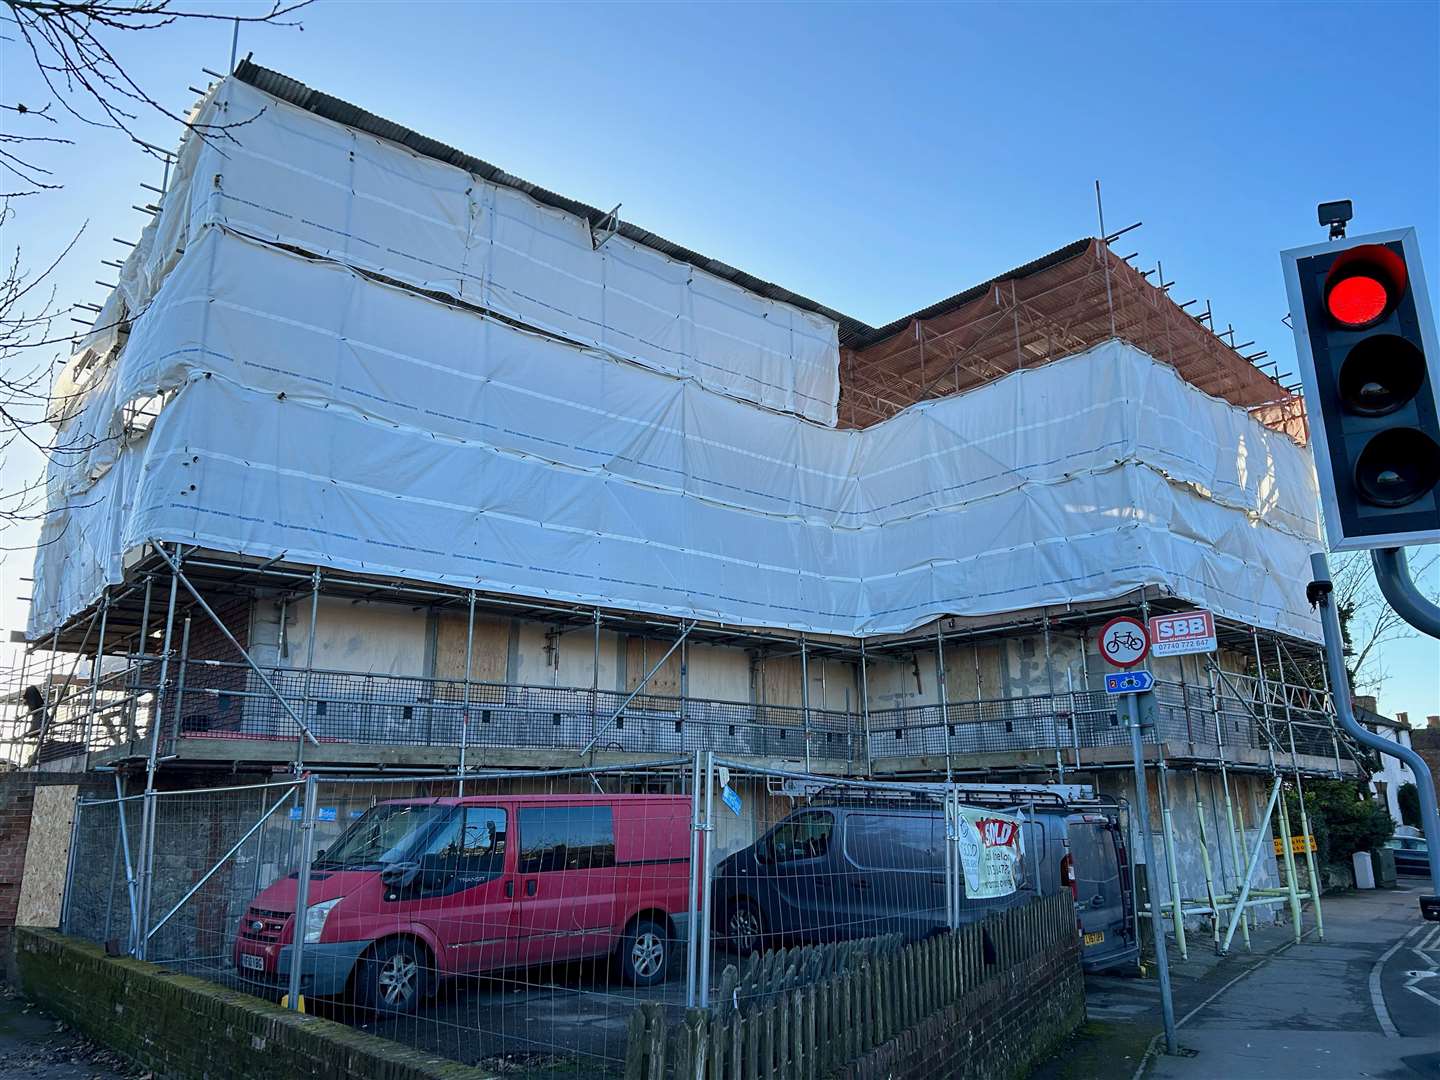 The former Dukes Head in Dymchurch Road, Hythe could is set to be used as a cafe or restaurant